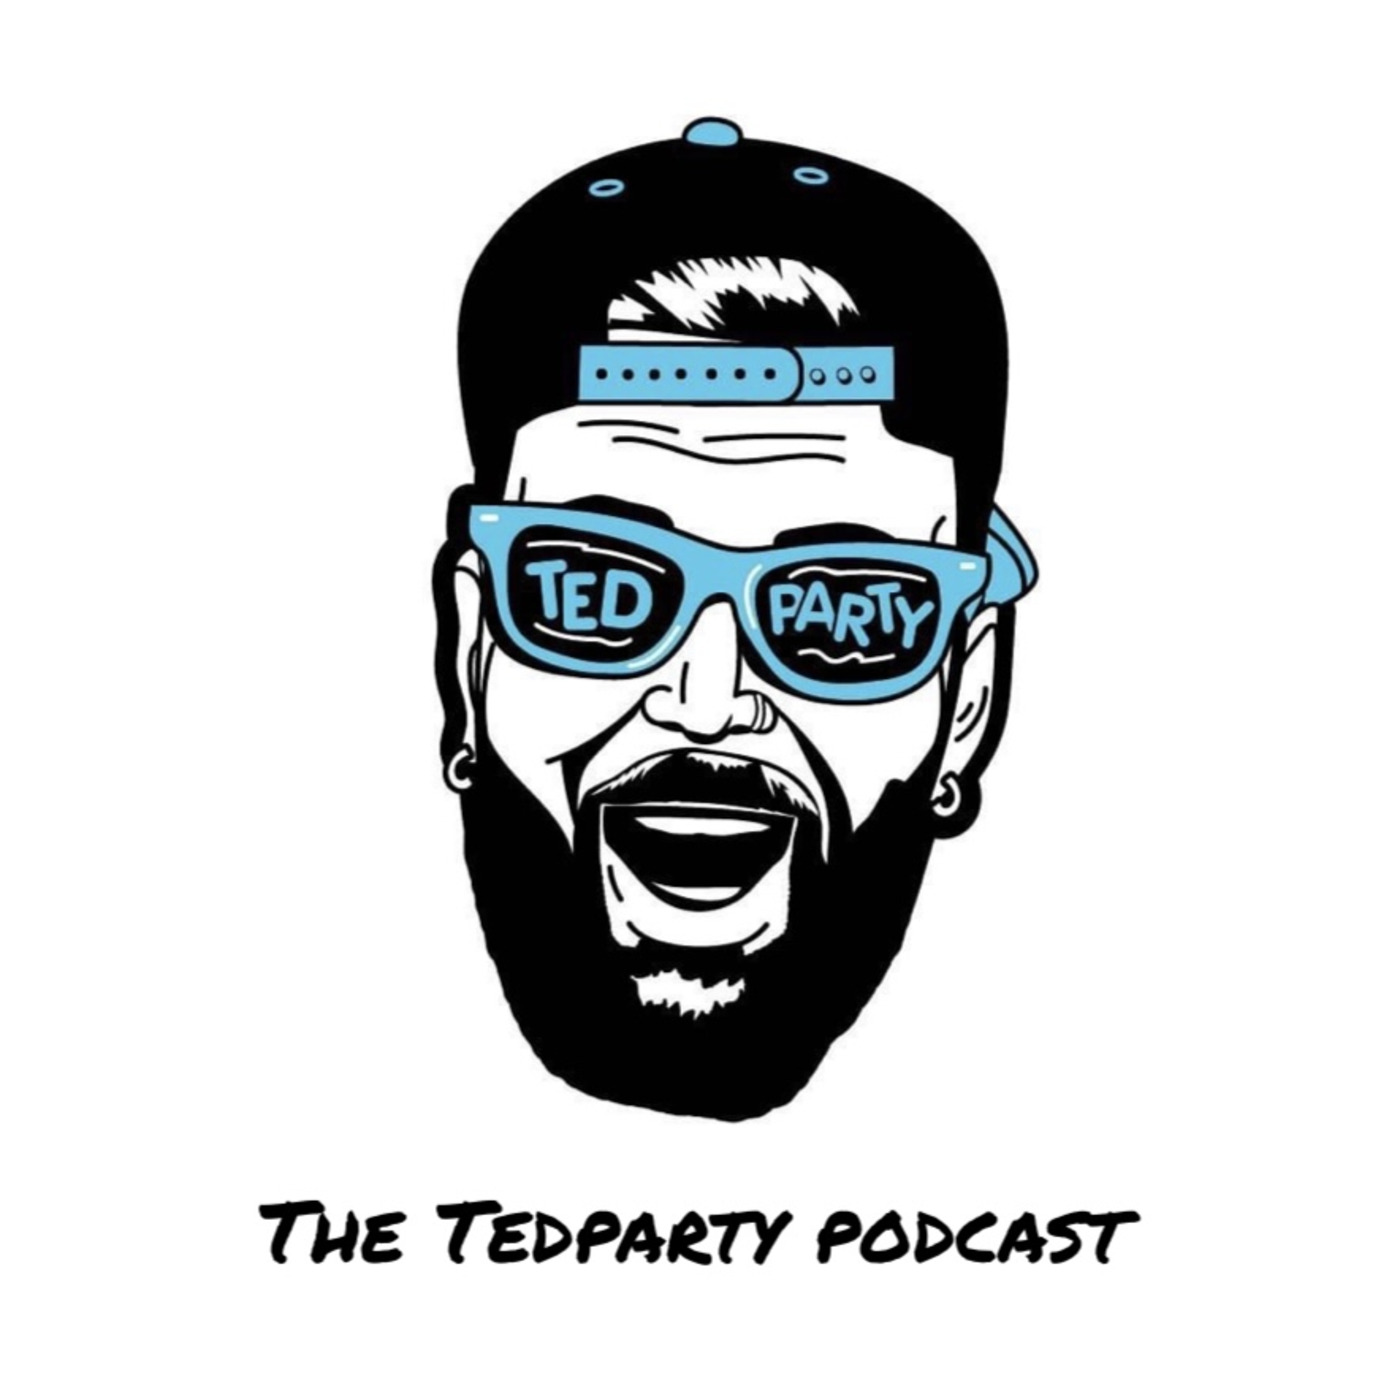 The Tedparty Podcast